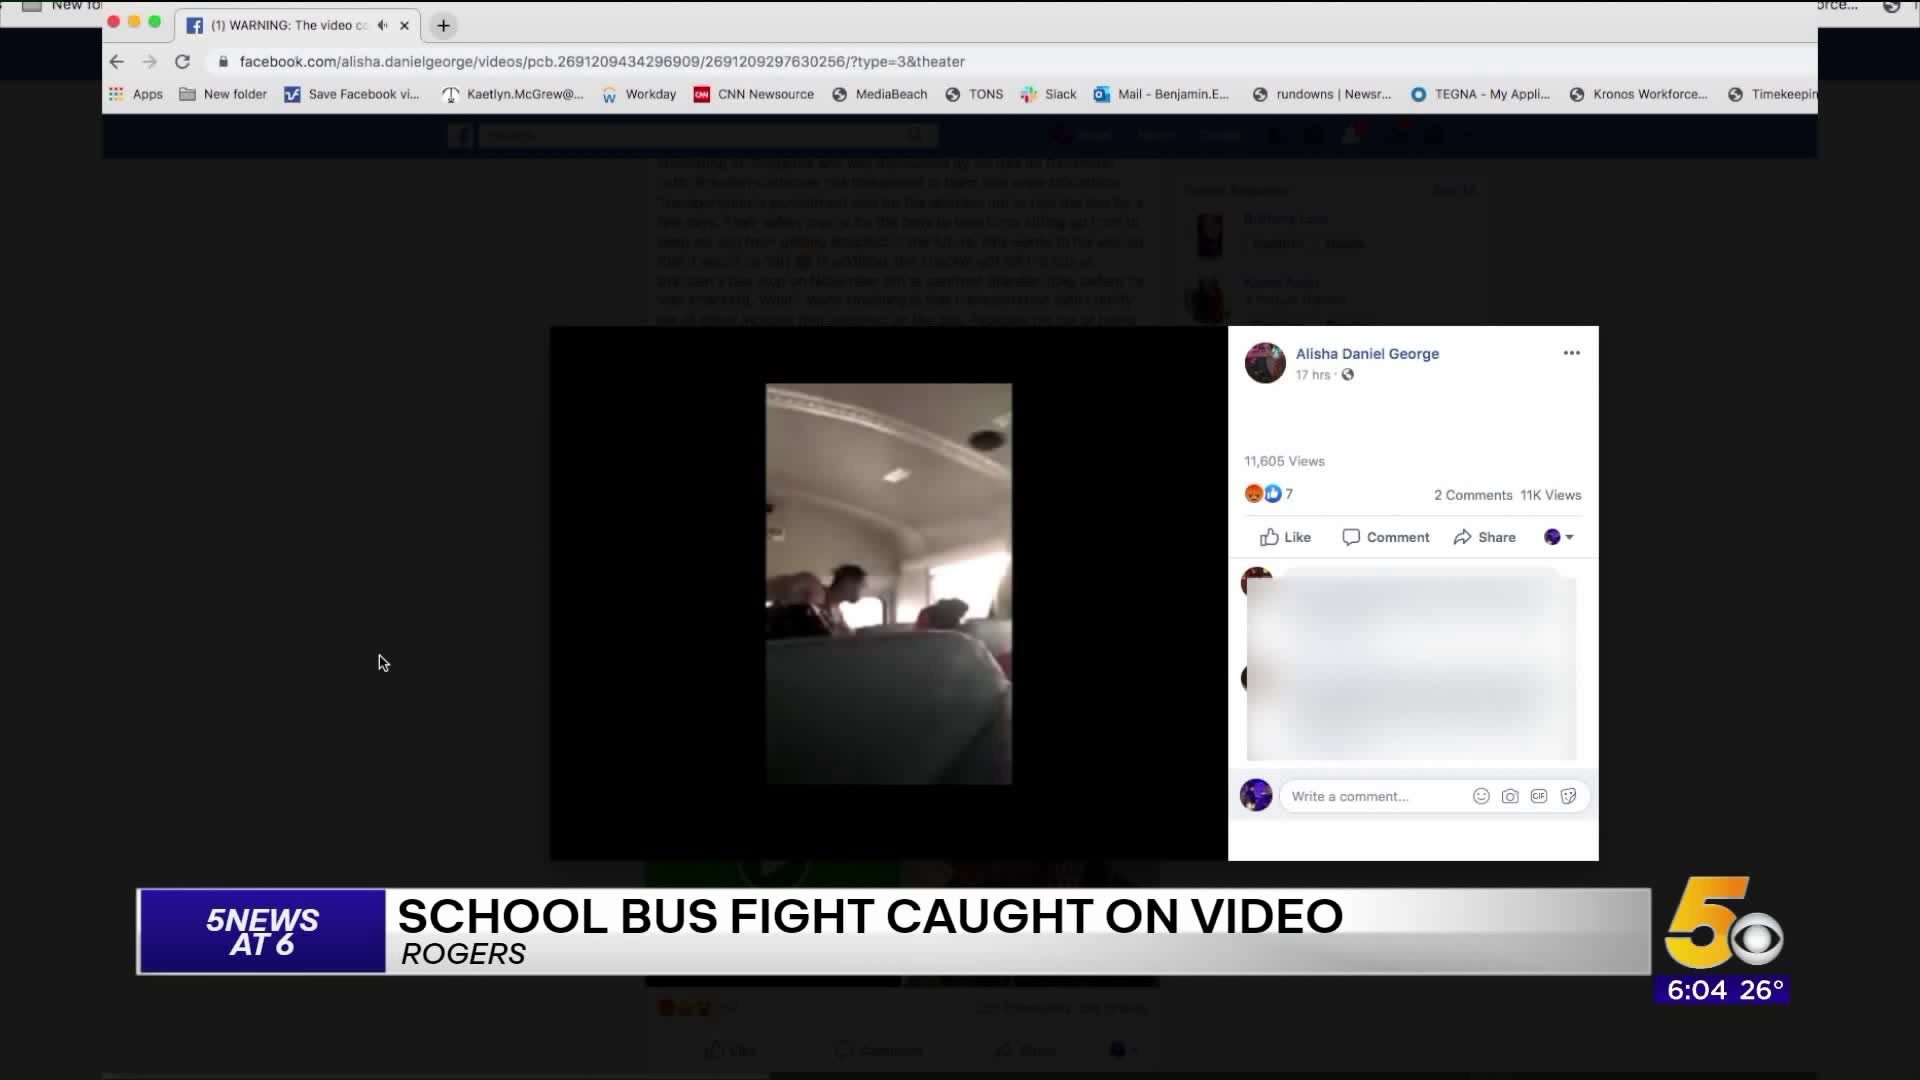 Rogers Police Address Shocking Fight Video On School Bus